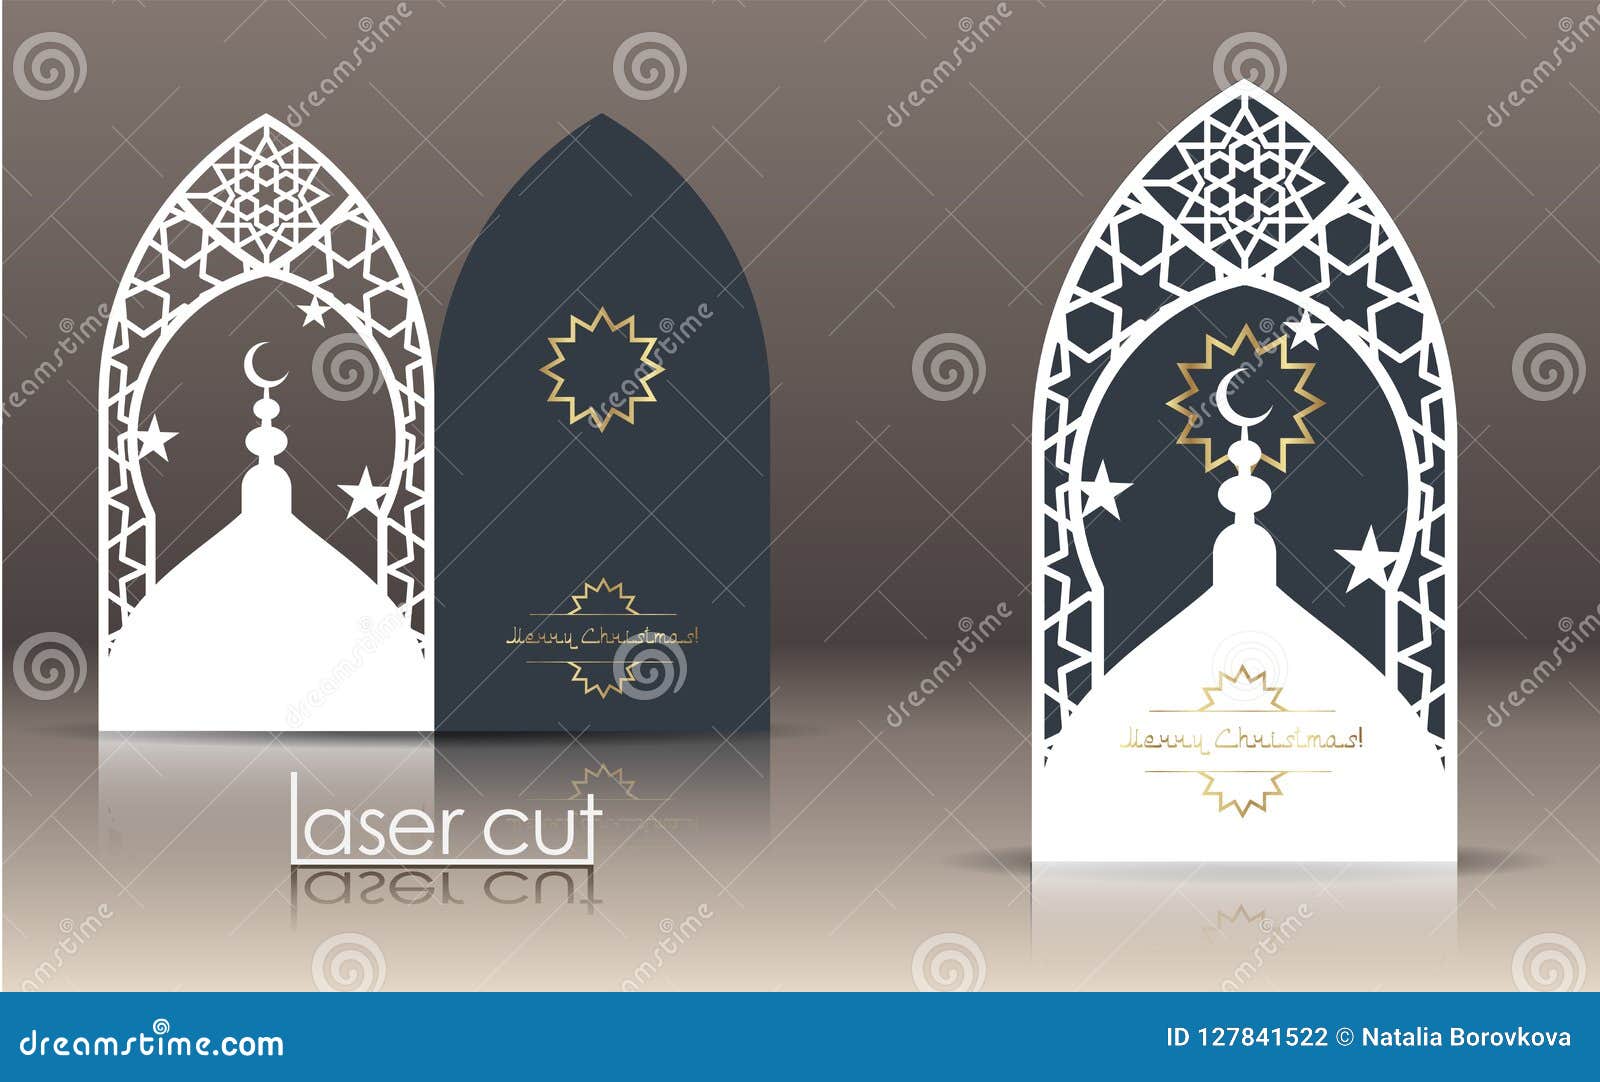 3d postcard layout with islamic oriental pattern for laser cutting paper. indian heritage, arabesque, persian motif